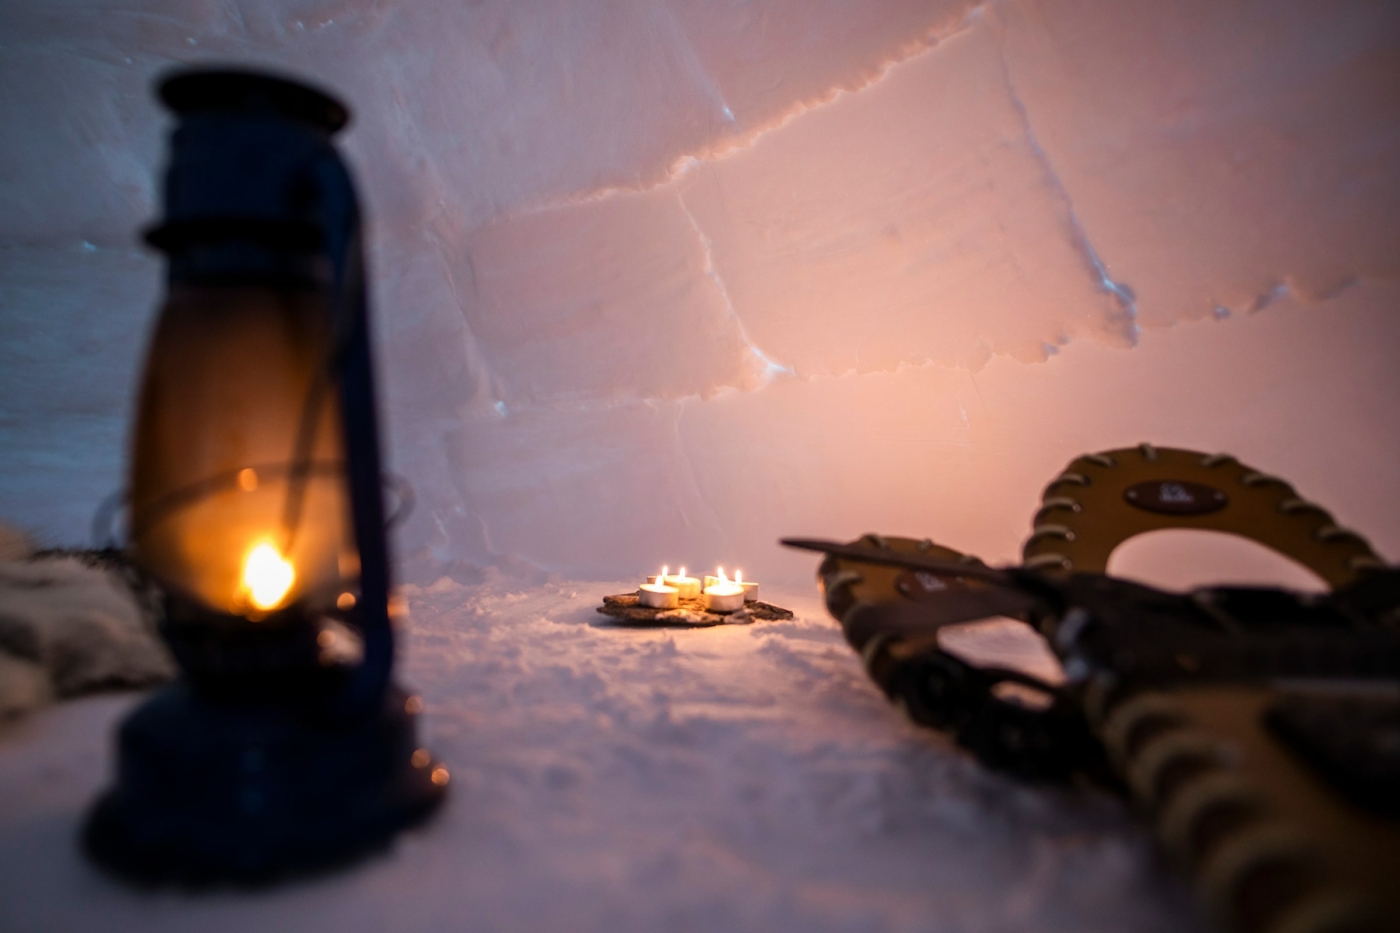 Candles lit in an igloo. Photo - Aningaaq R. Carlsen, Visit Greenland